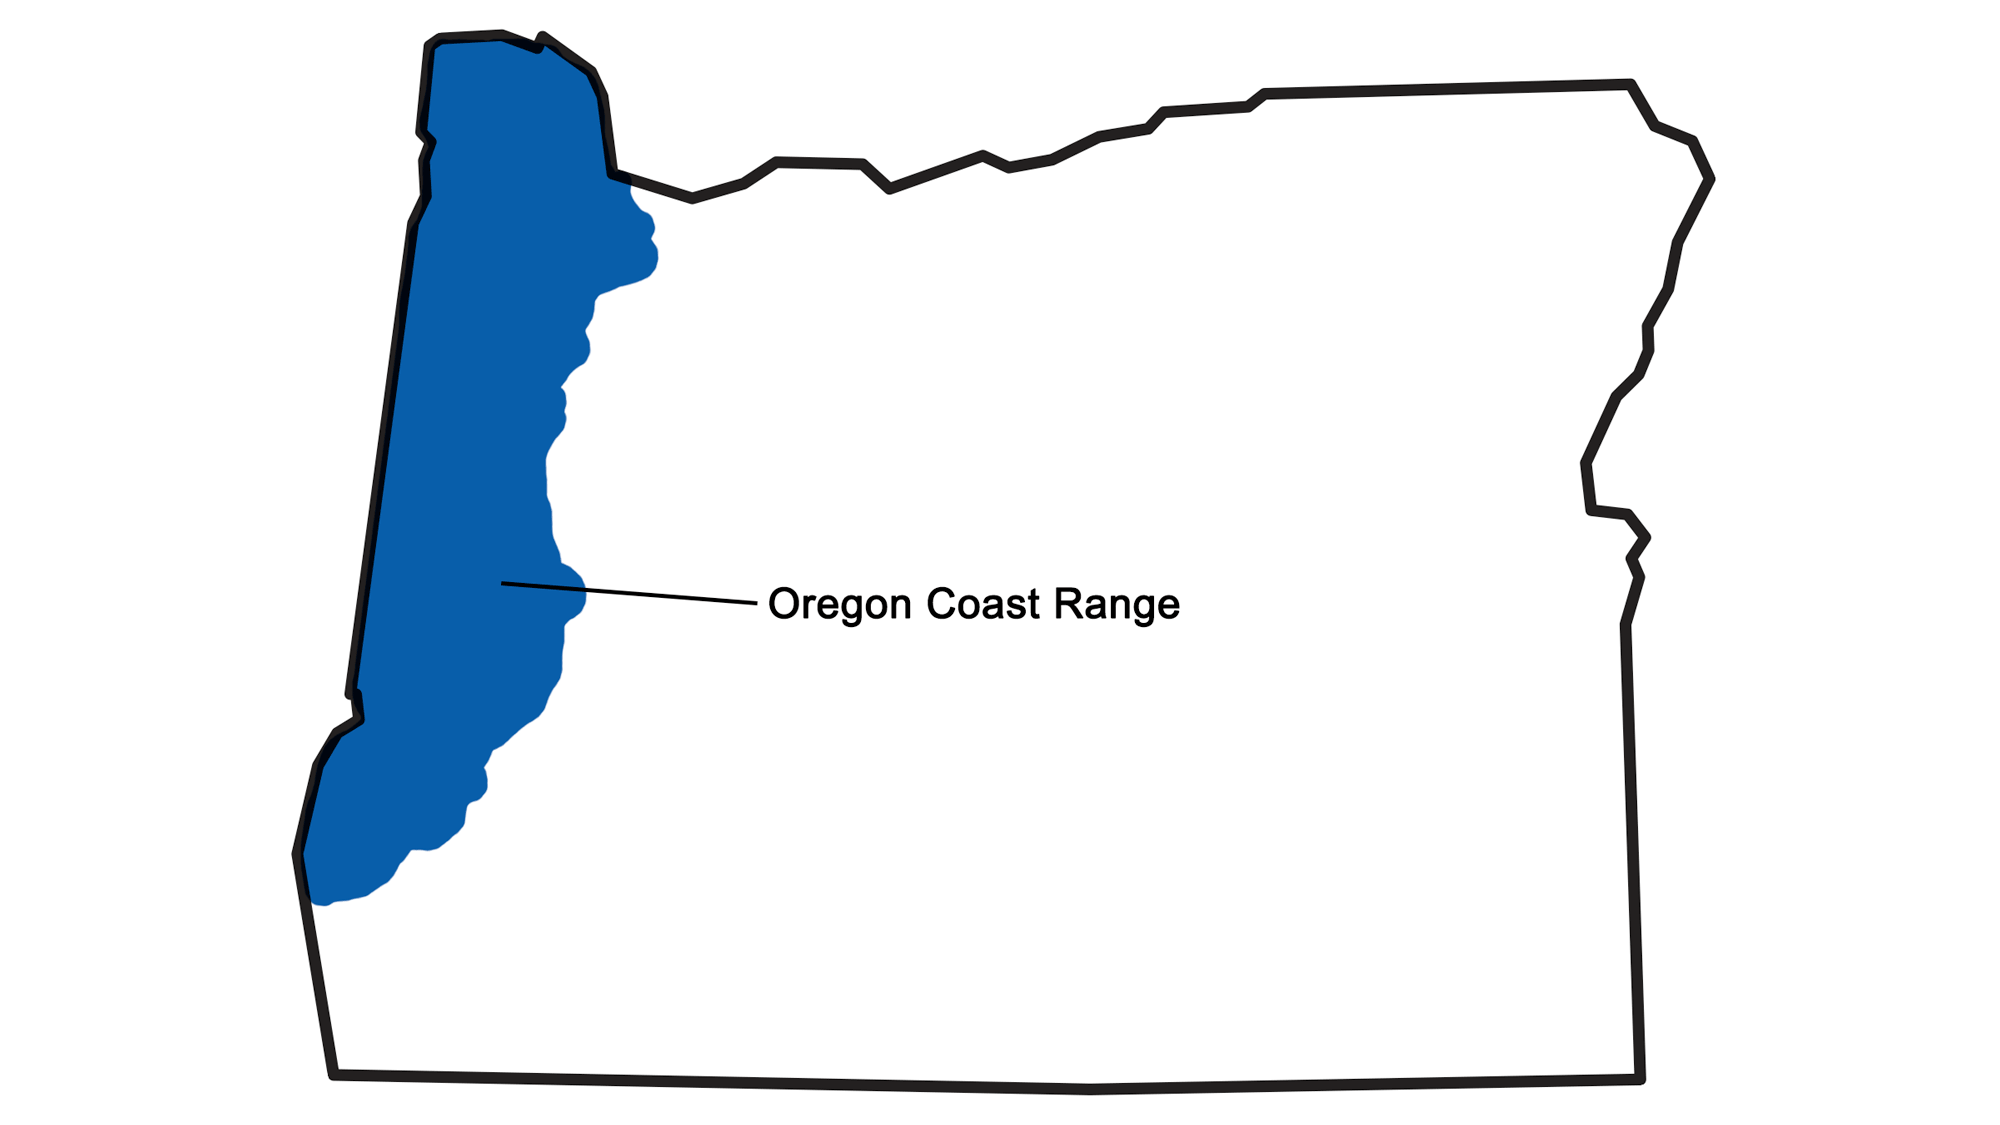 Simple map showing the position of the Oregon Coast Range.